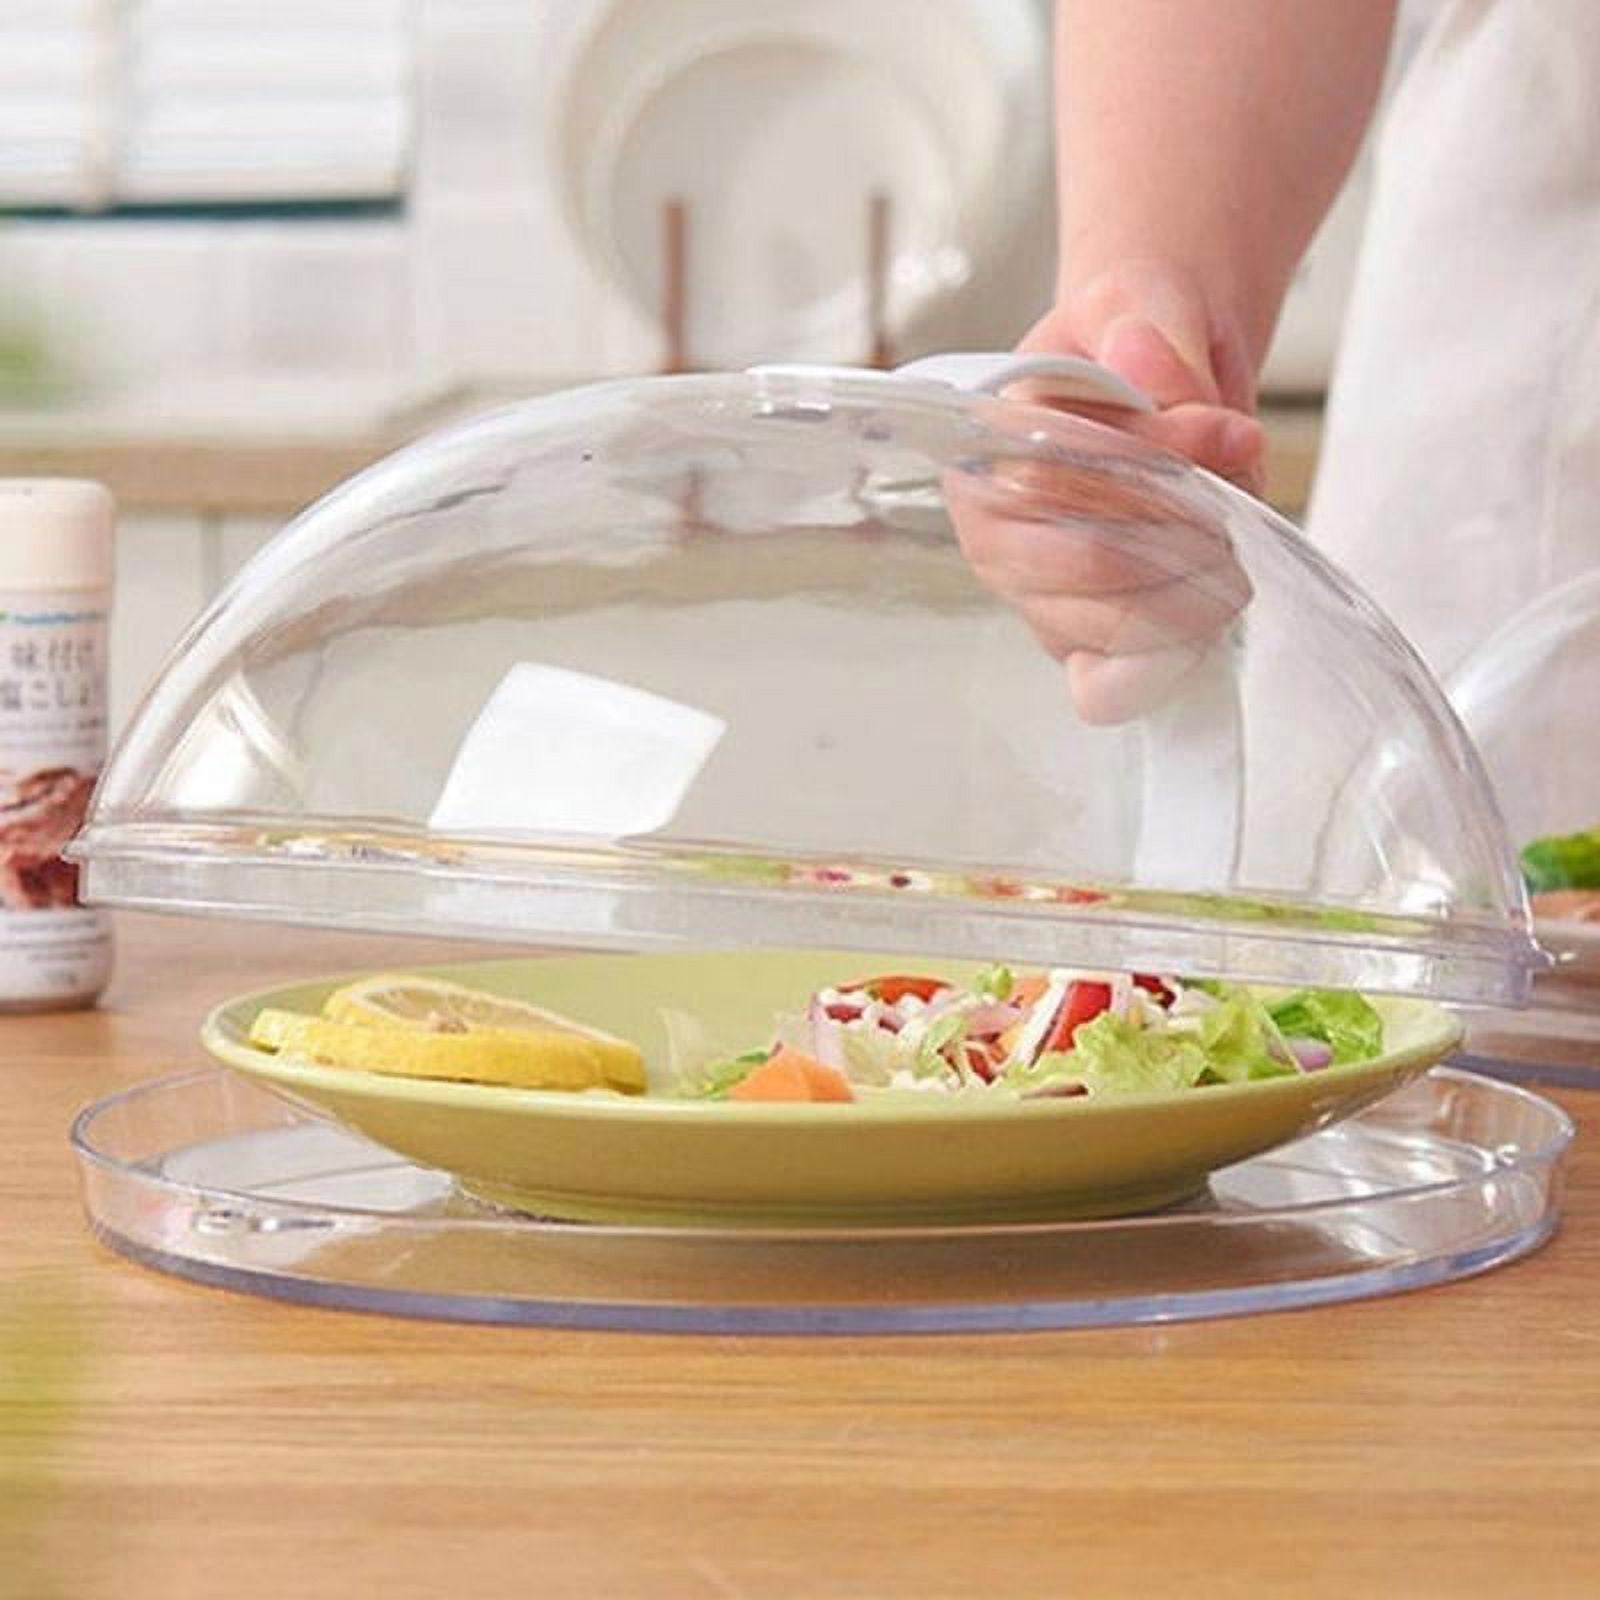 OOKWE Safe ABS Microwave Food Cover Splatter Cover Guard with Handle